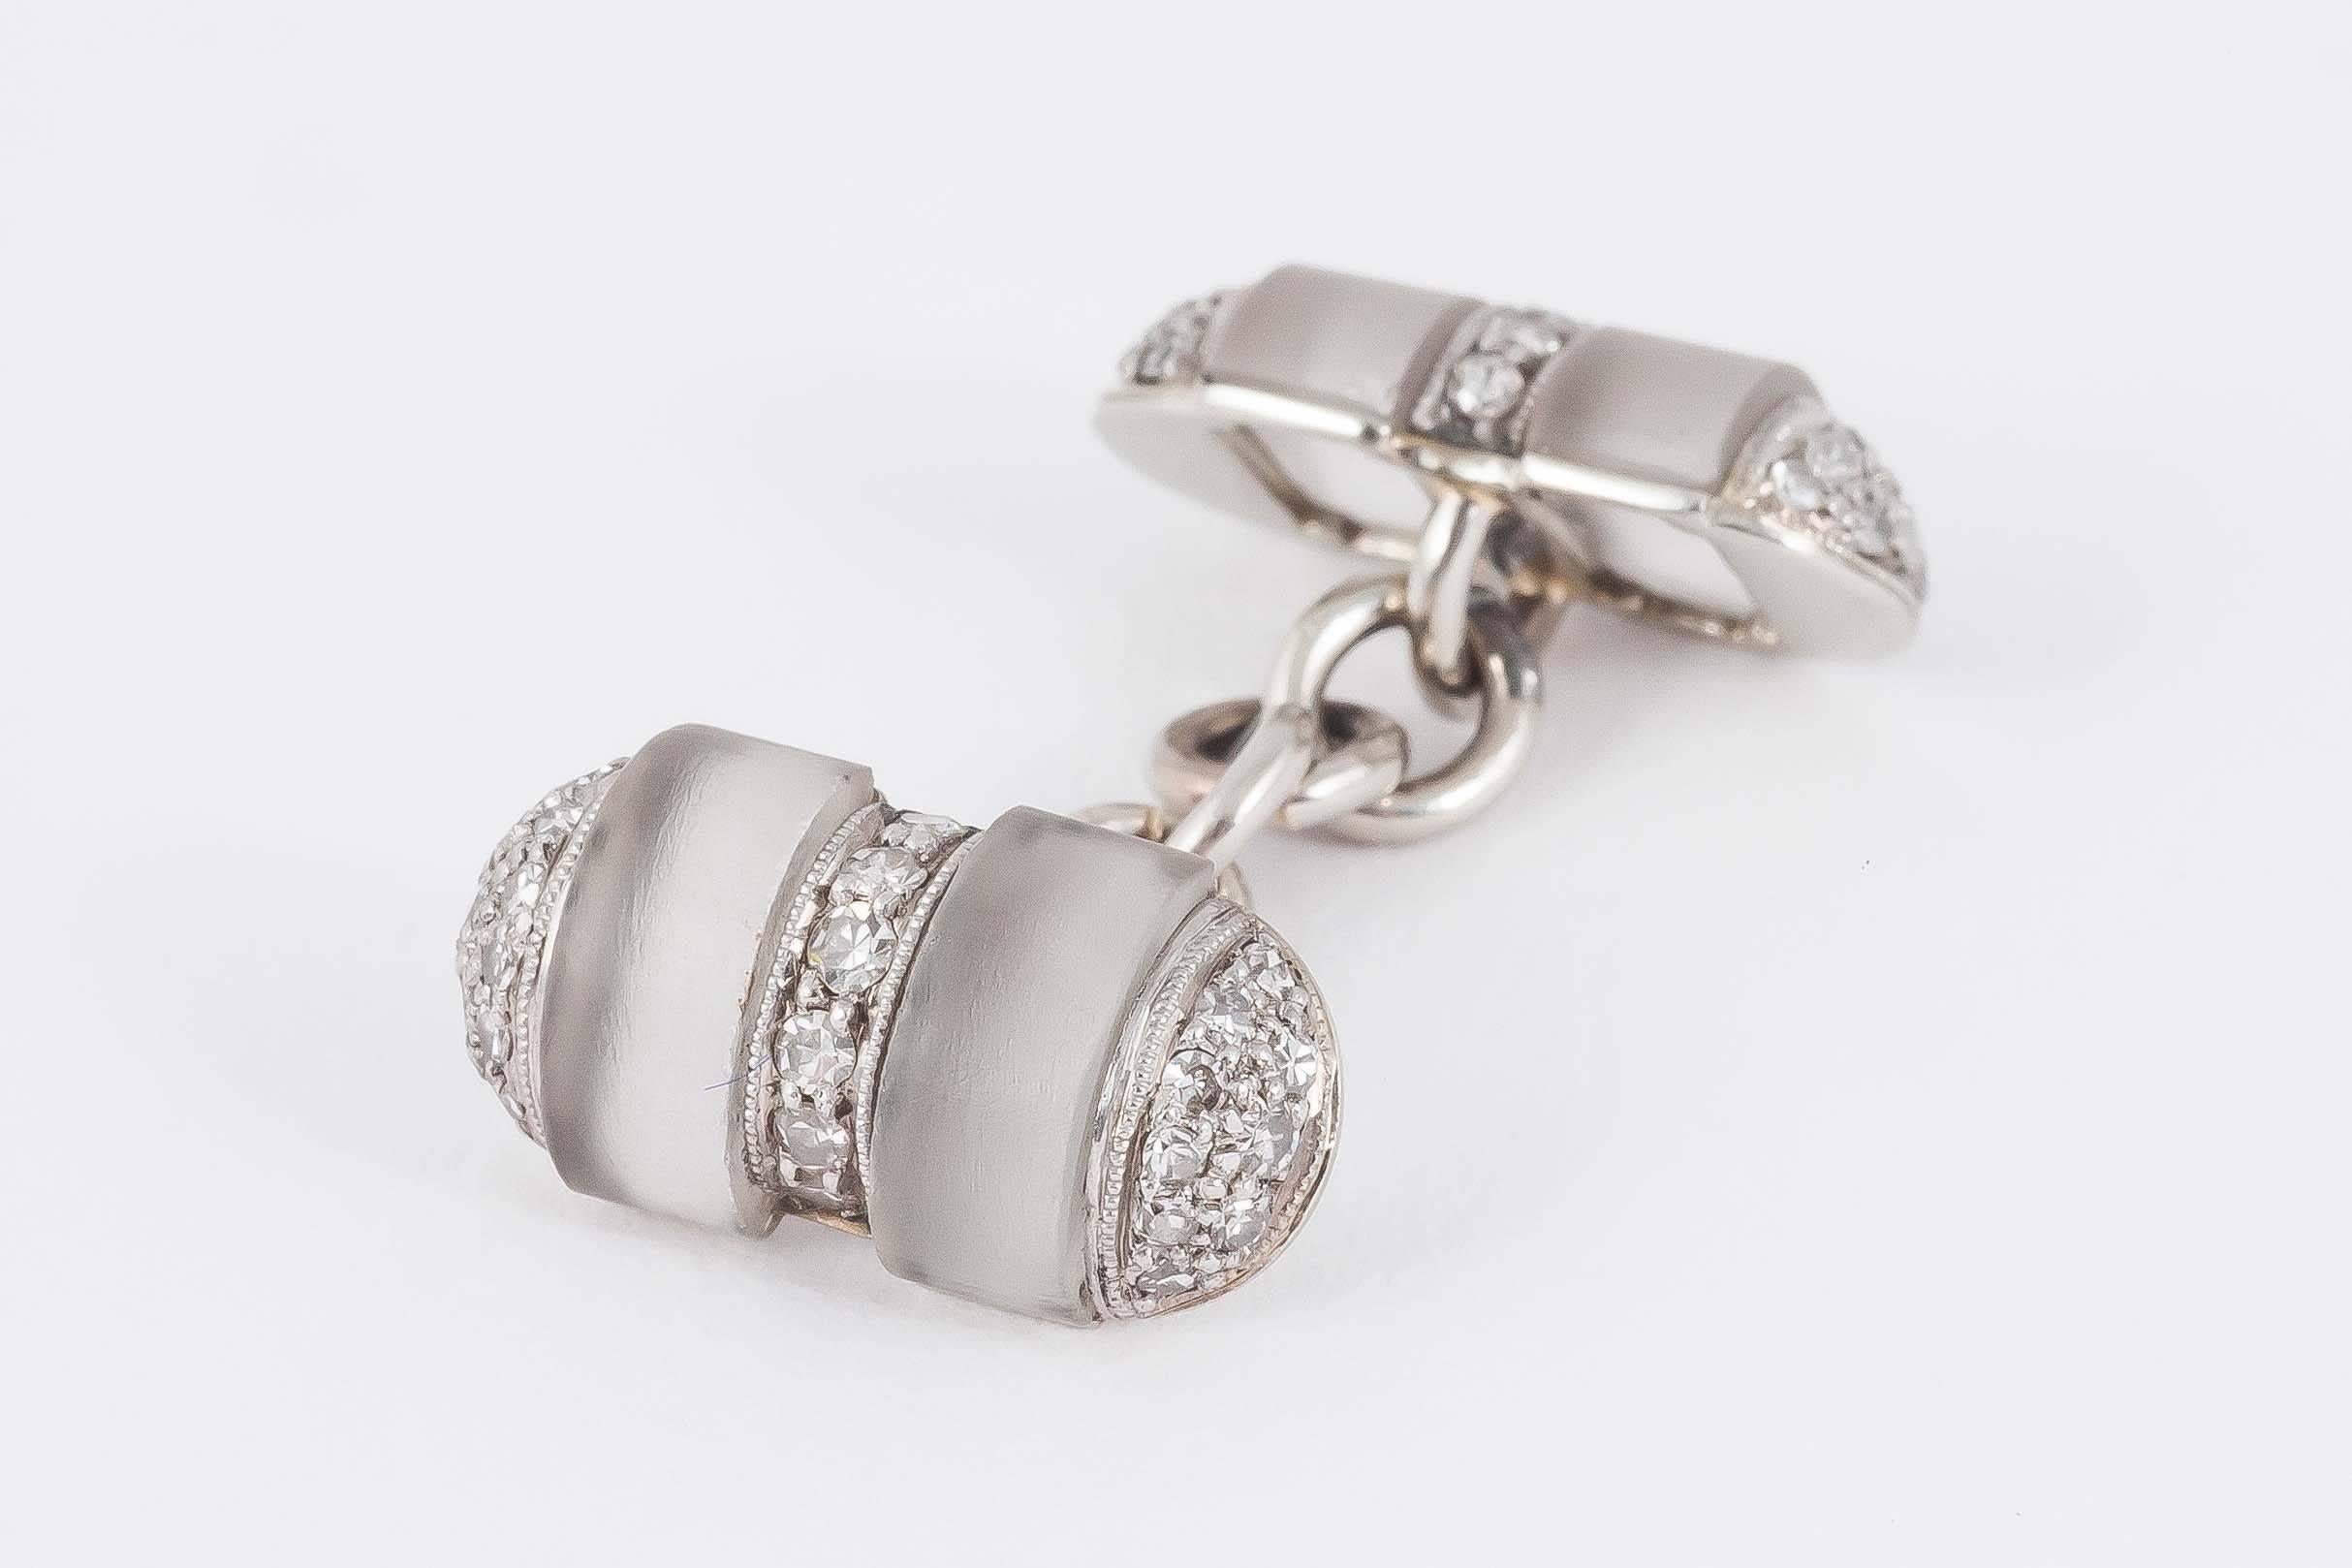 Art Deco Cufflinks set with  Crystal, Diamond and Gold mounted, with studs. C, 1920